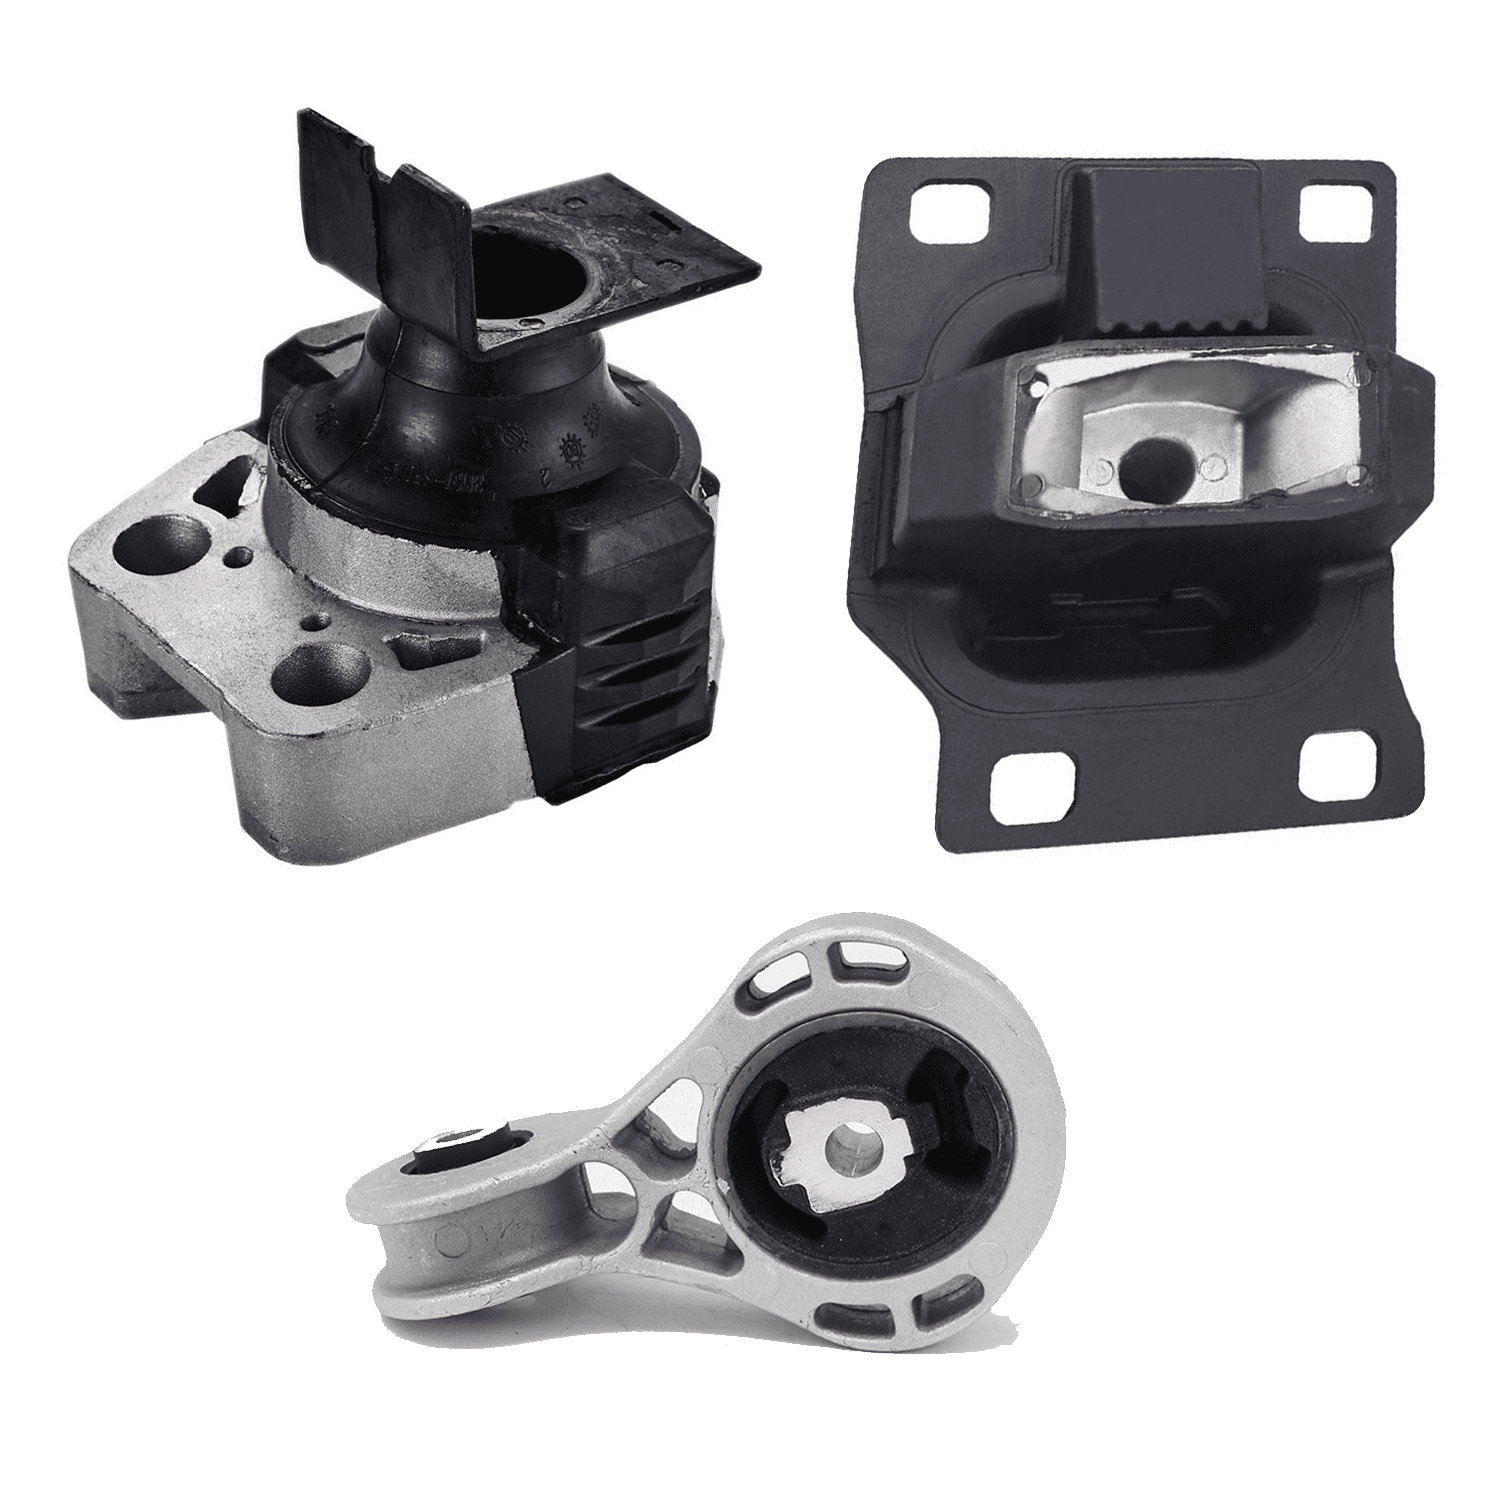 2000 2001 2002 2003 2004 Engine Mounts Auto Automatic & Manual Transmission MT AT 3pc Set Motor Mounts Kit Compatible with 00-04 Ford Focus 2.0L DOHC ONLY